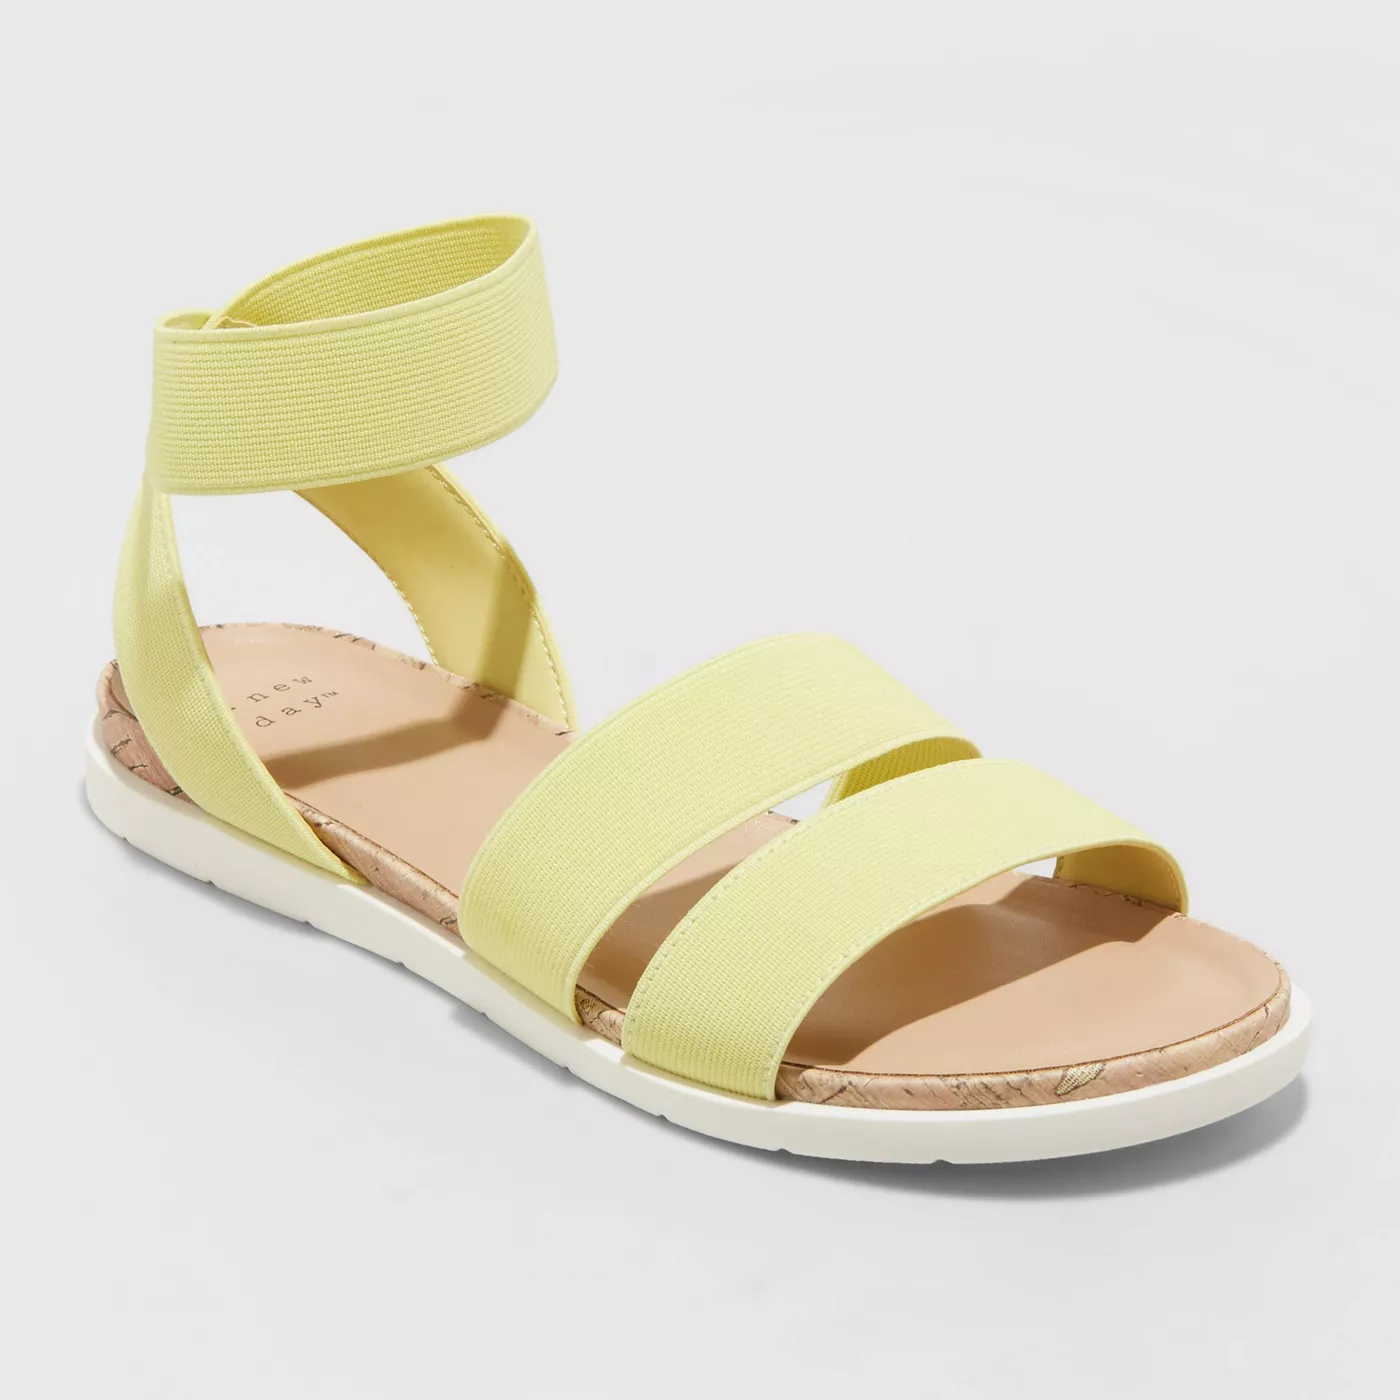 Women's Esme Elastic Ankle Strap Sandals - A New Day™ - image 1 of 11